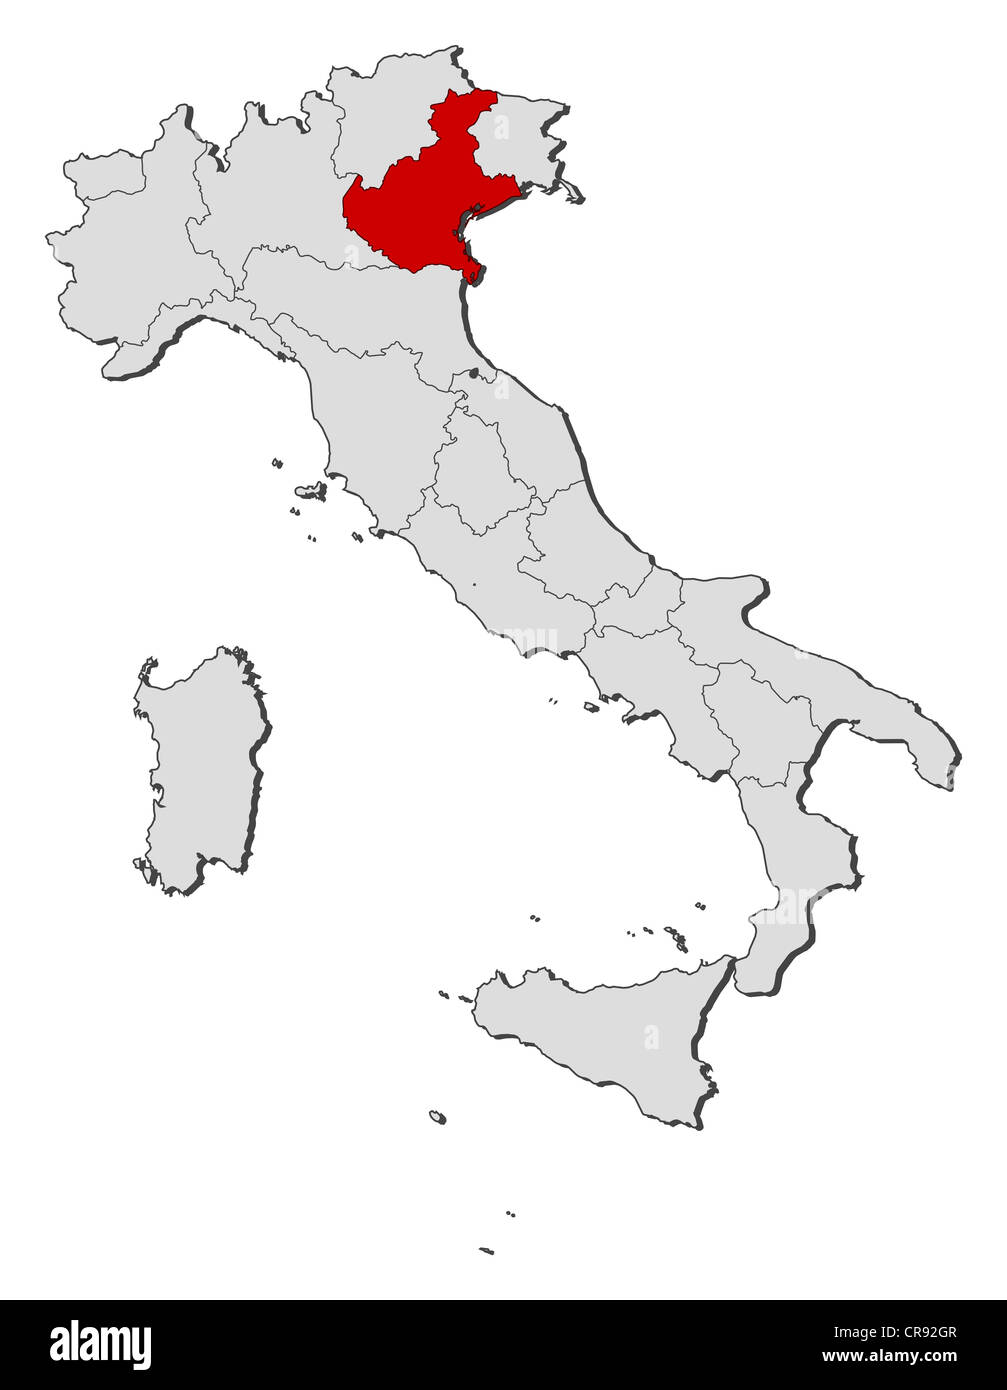 Political map of Italy with the several regions where Veneto is highlighted. Stock Photo